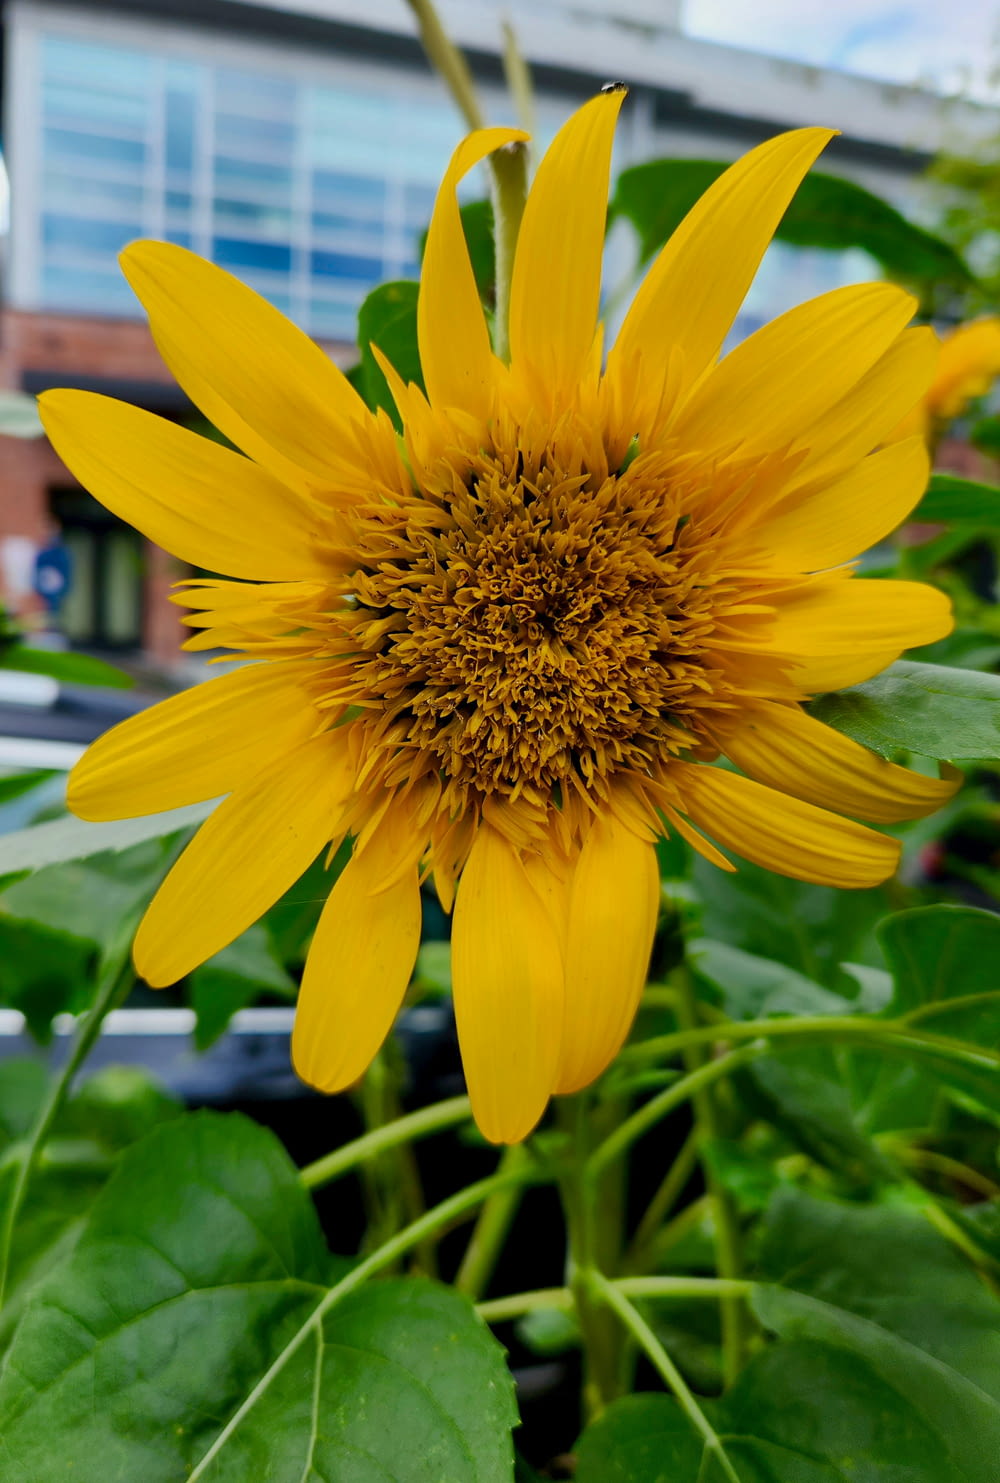 a large yellow sunflower in a garden